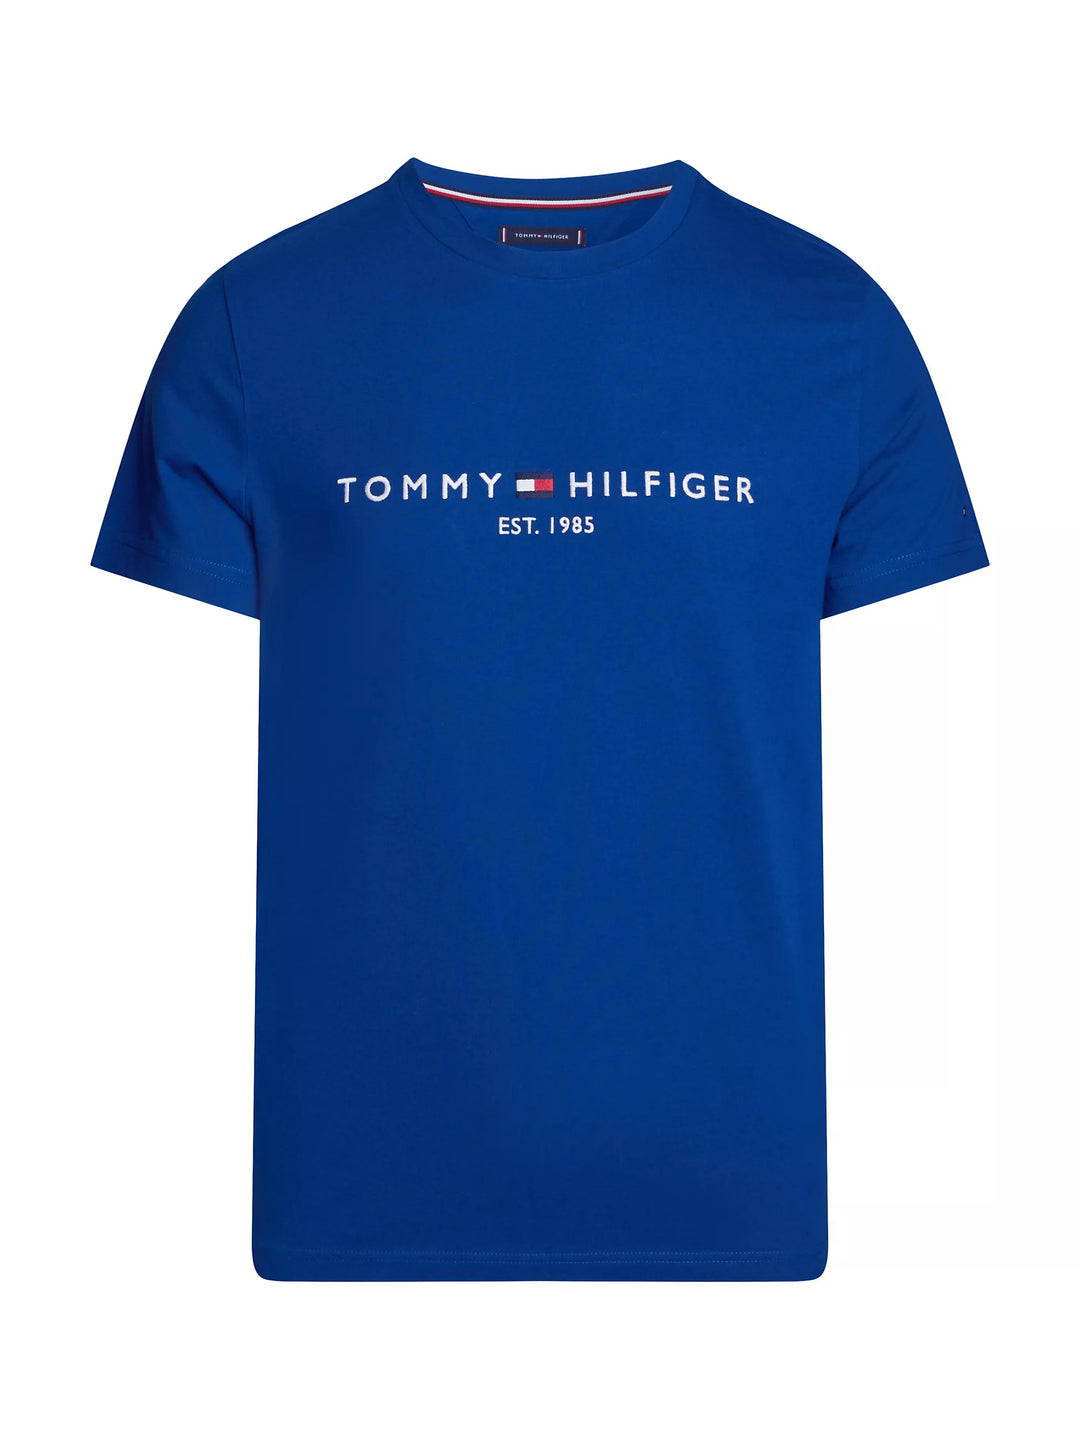 TH TOMMY LOGO TEE - ANCHOR BLUE